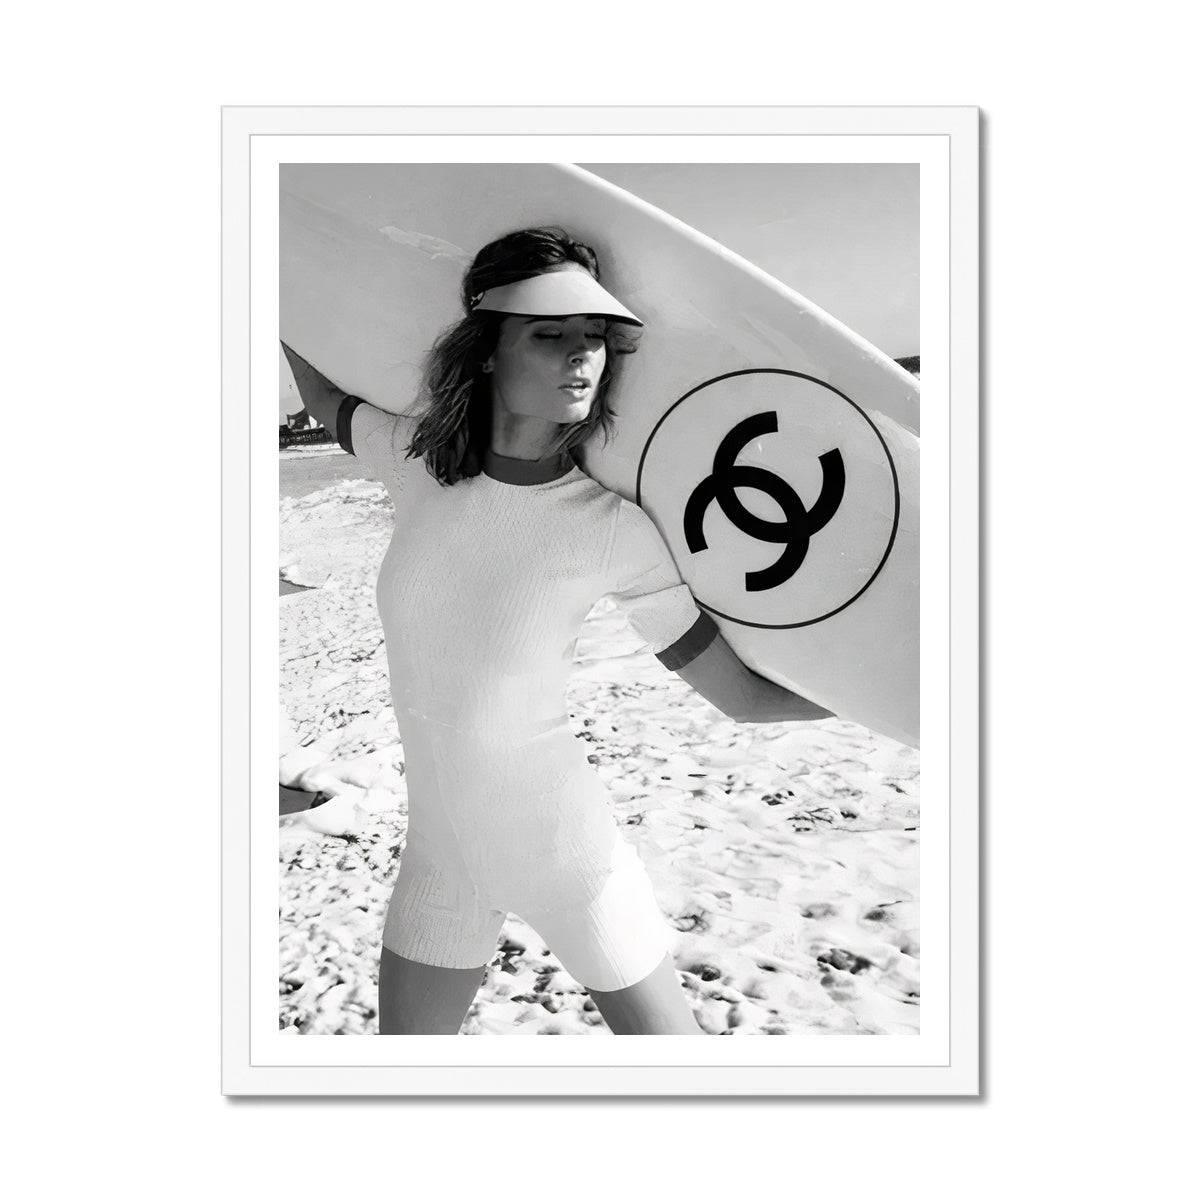 Chanel Surfboard Poster, Feminist Print,Large Square, XL Art Photography  Prints.